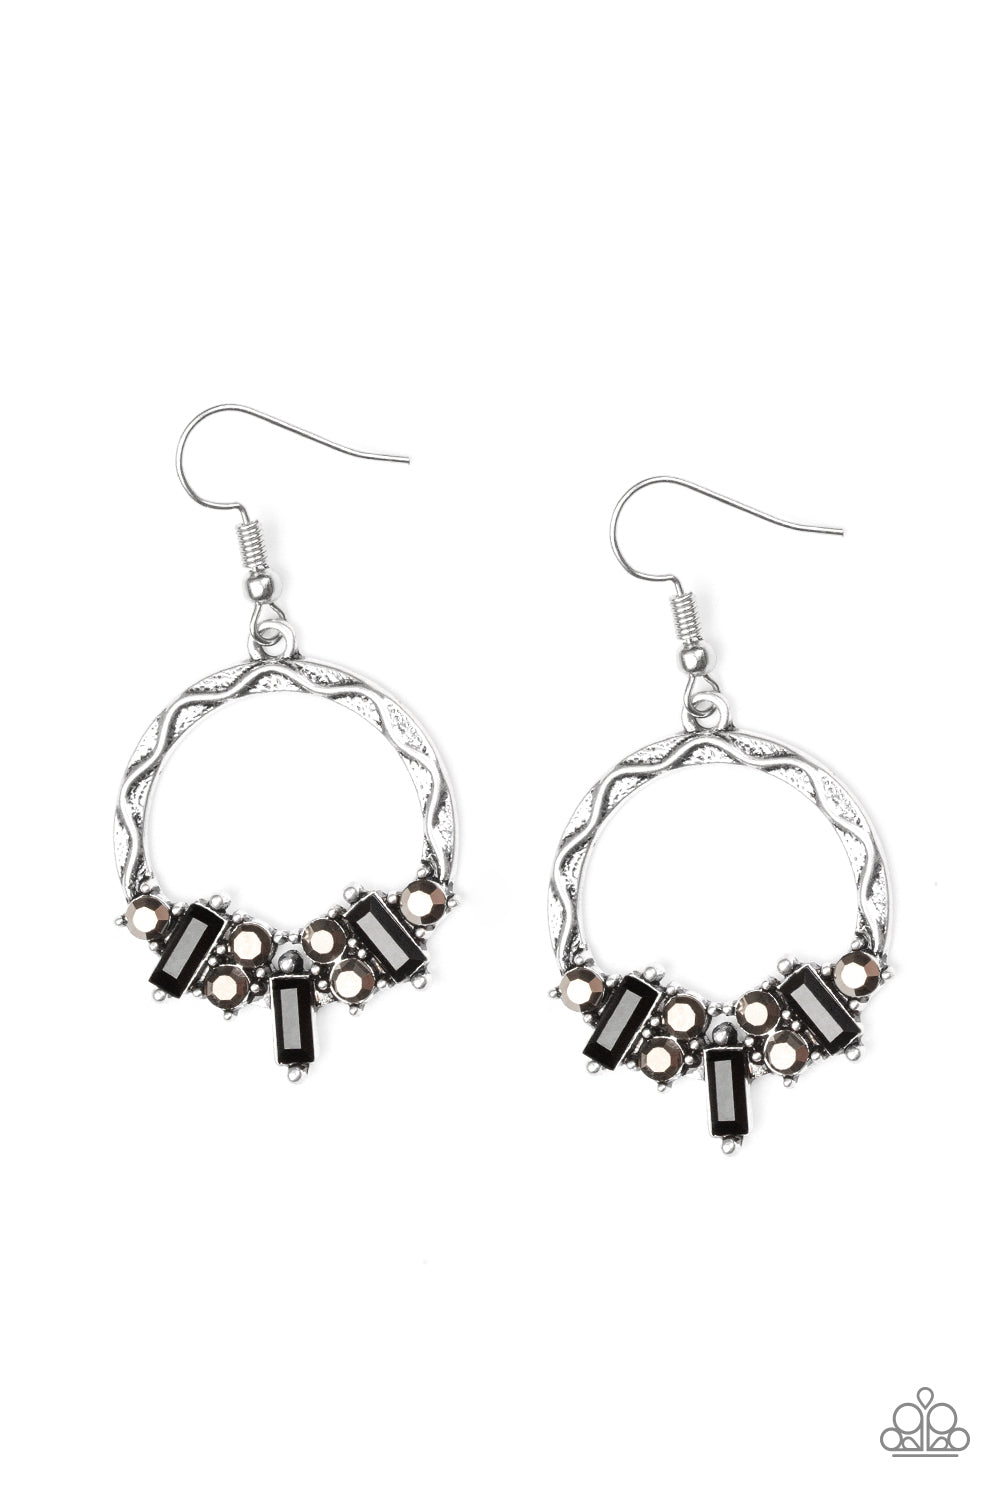 On The Uptrend - Silver earrings